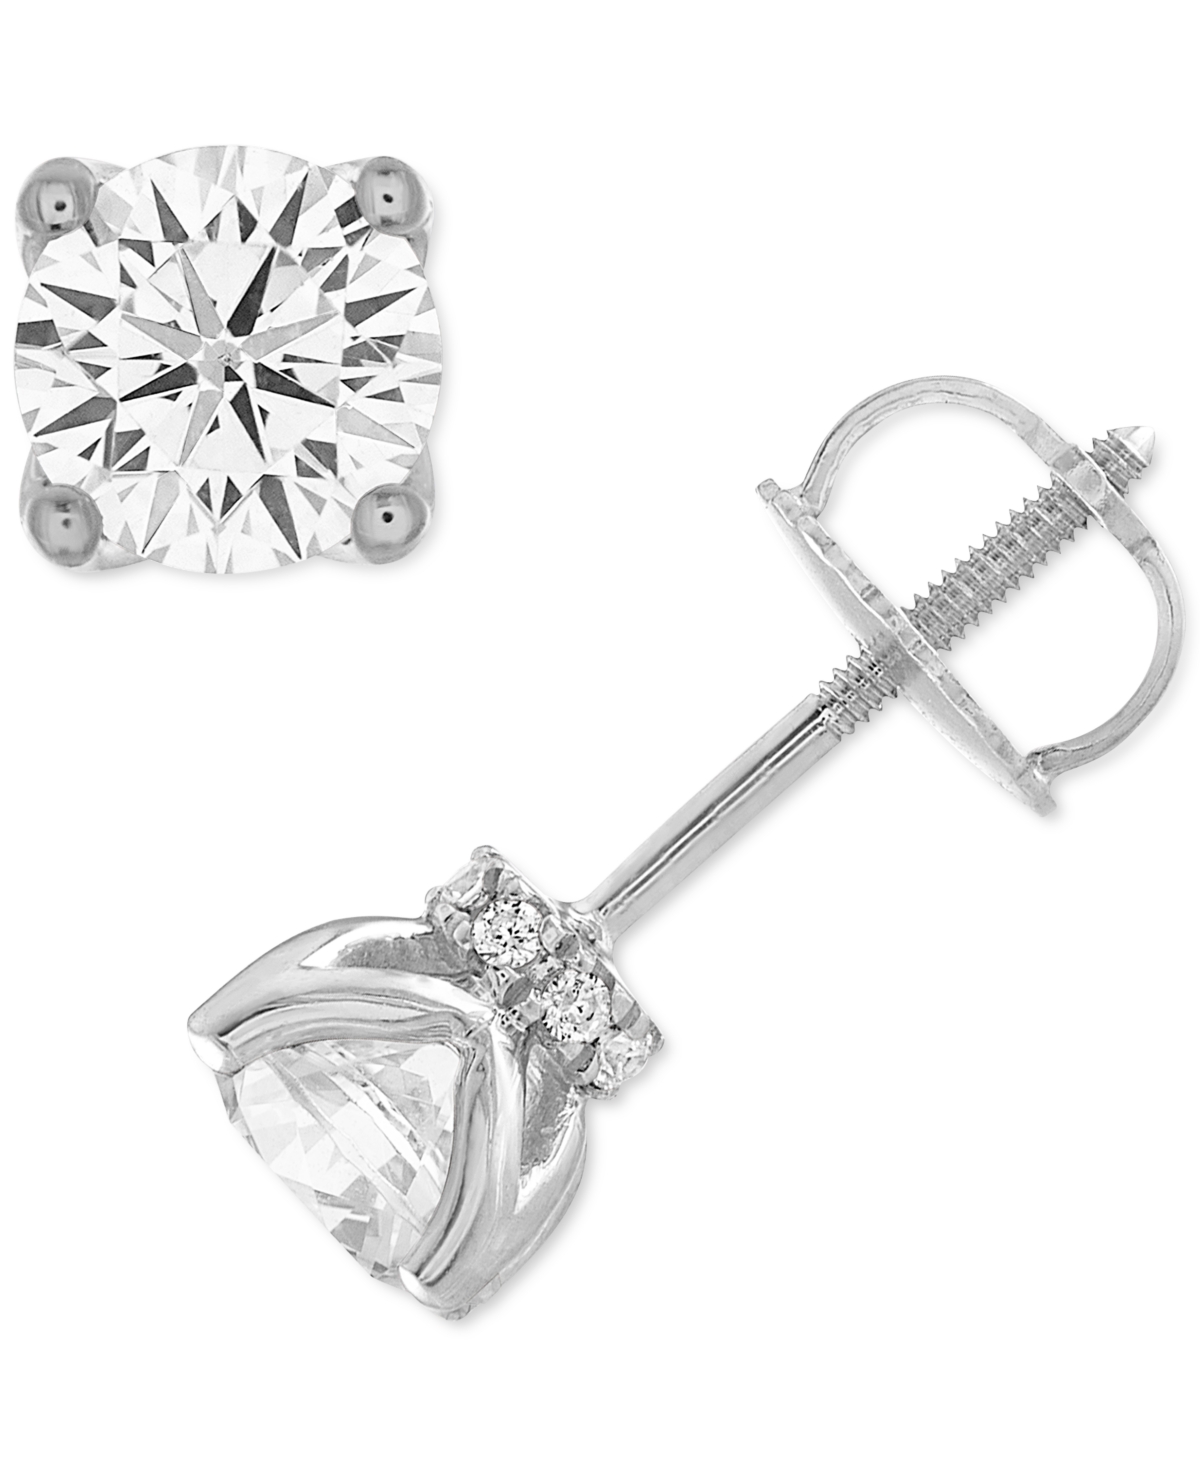 Certified Diamond Stud Earrings (1 ct. t.w.) in 14k White Gold featuring diamonds with the De Beers Code of Origin, Created for Macy's - White